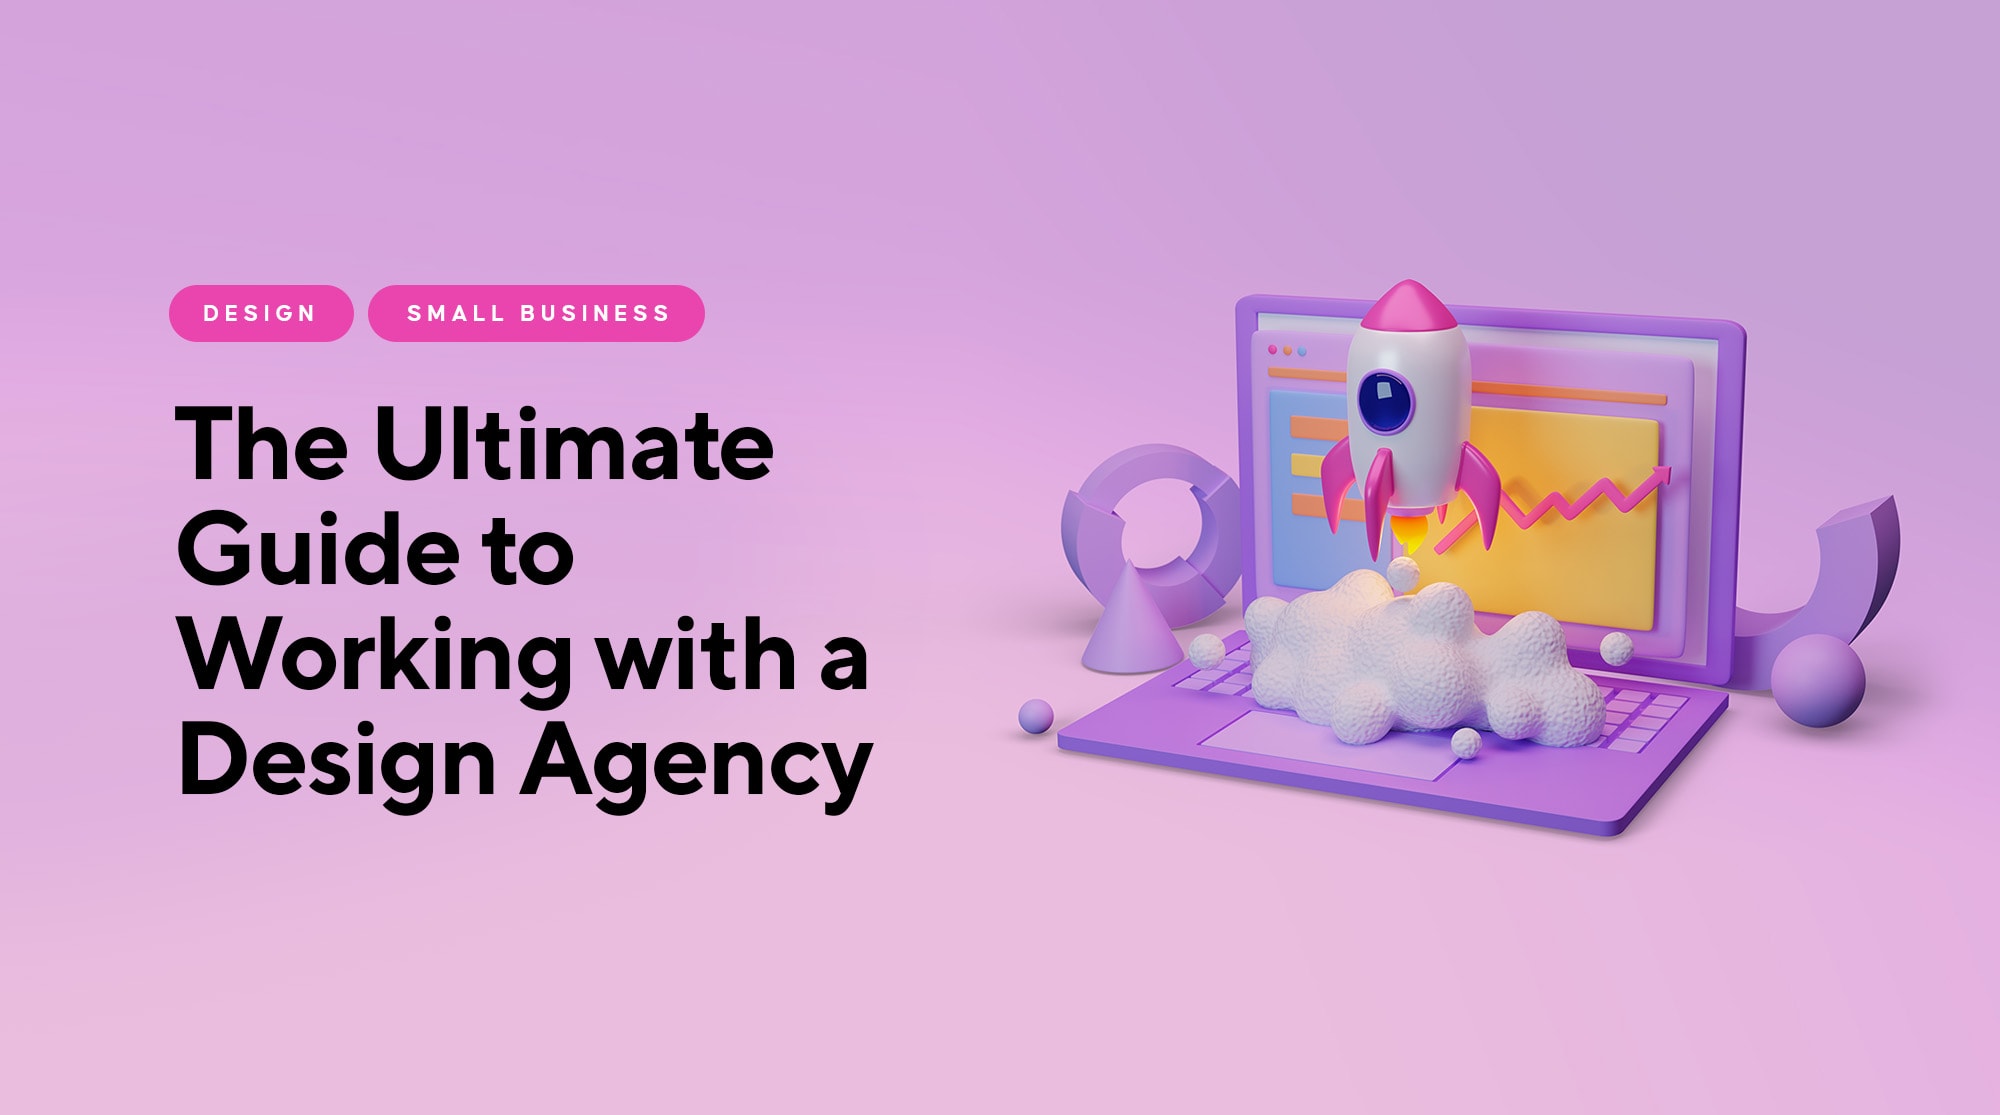 The Ultimate Guide to Branding Agency for Small Business